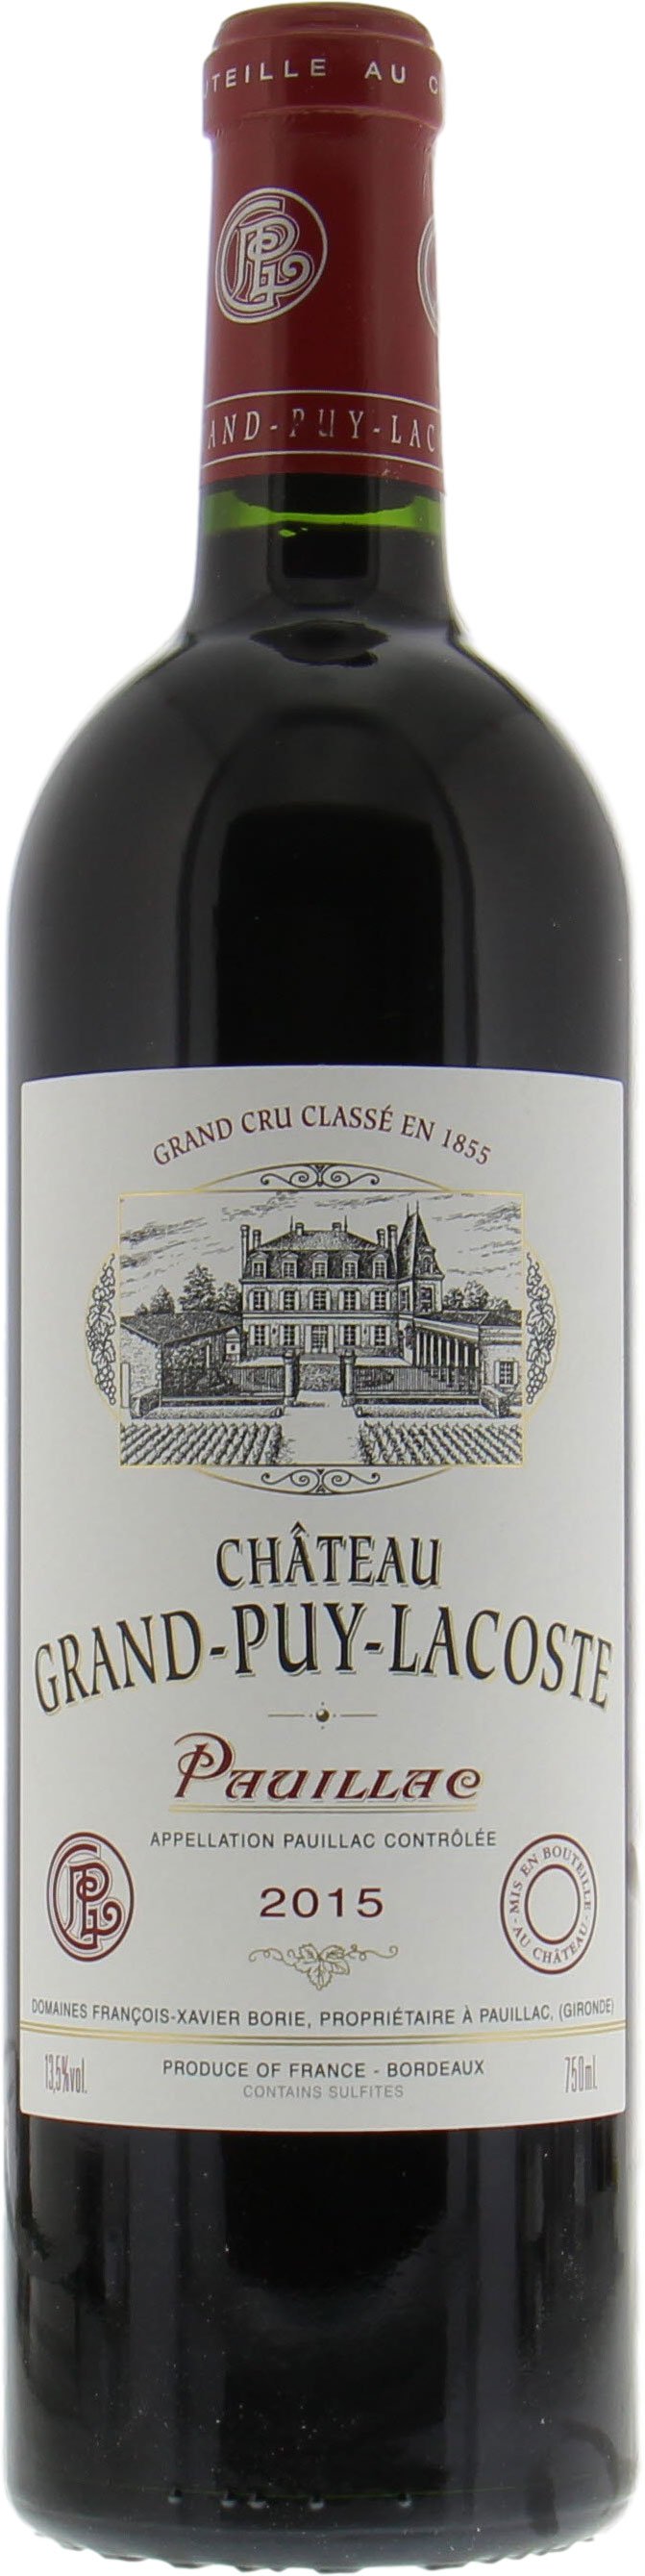 Chateau Grand Puy Lacoste - Chateau Grand Puy Lacoste 2015 Perfect